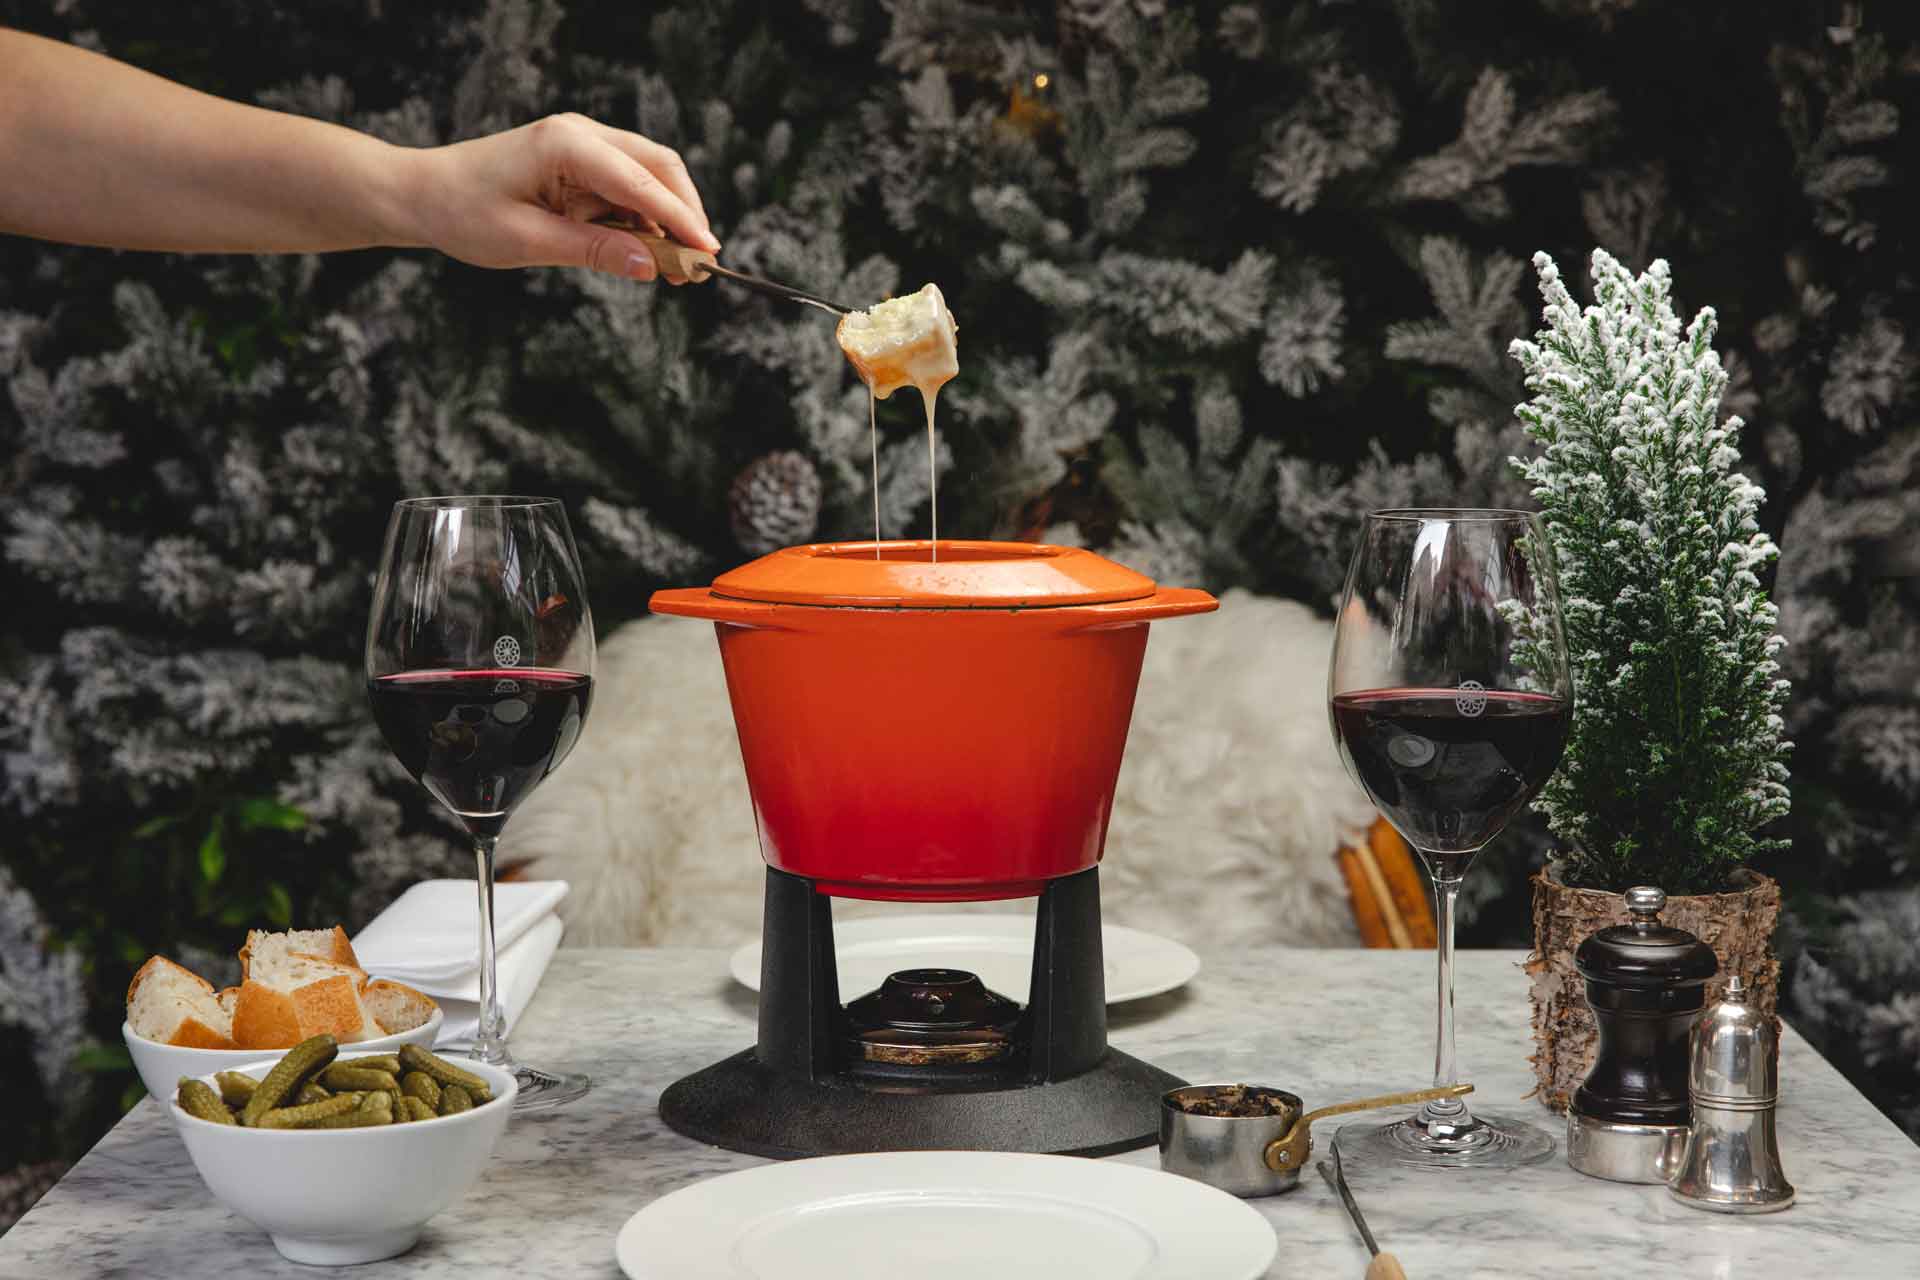 Winter at Dalloway Terrace: Is this London’s Most Festive Pop-Up?